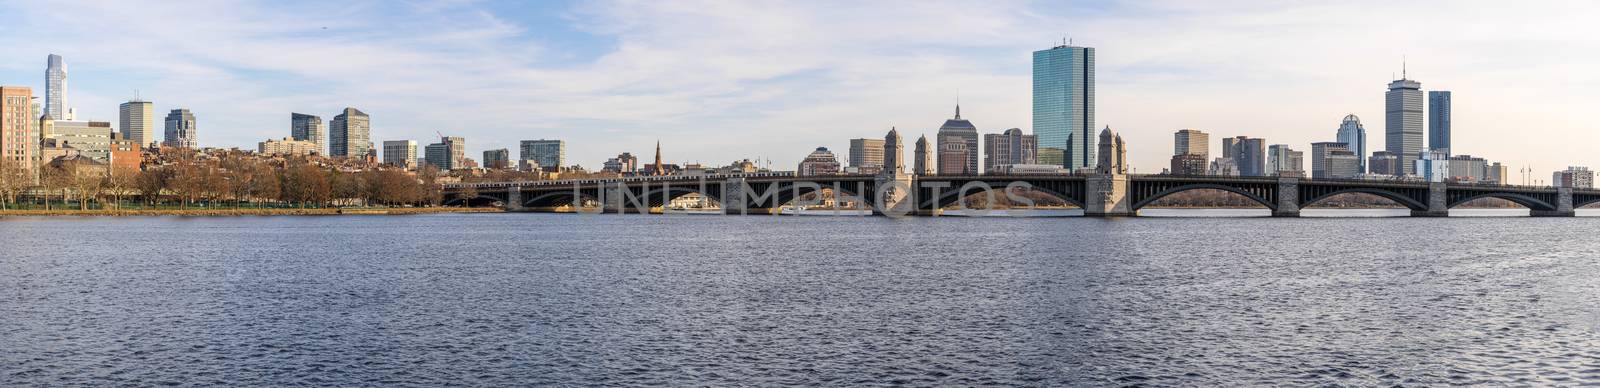 Panorama over of The Longfellow Bridge over the charles river at by Tzido